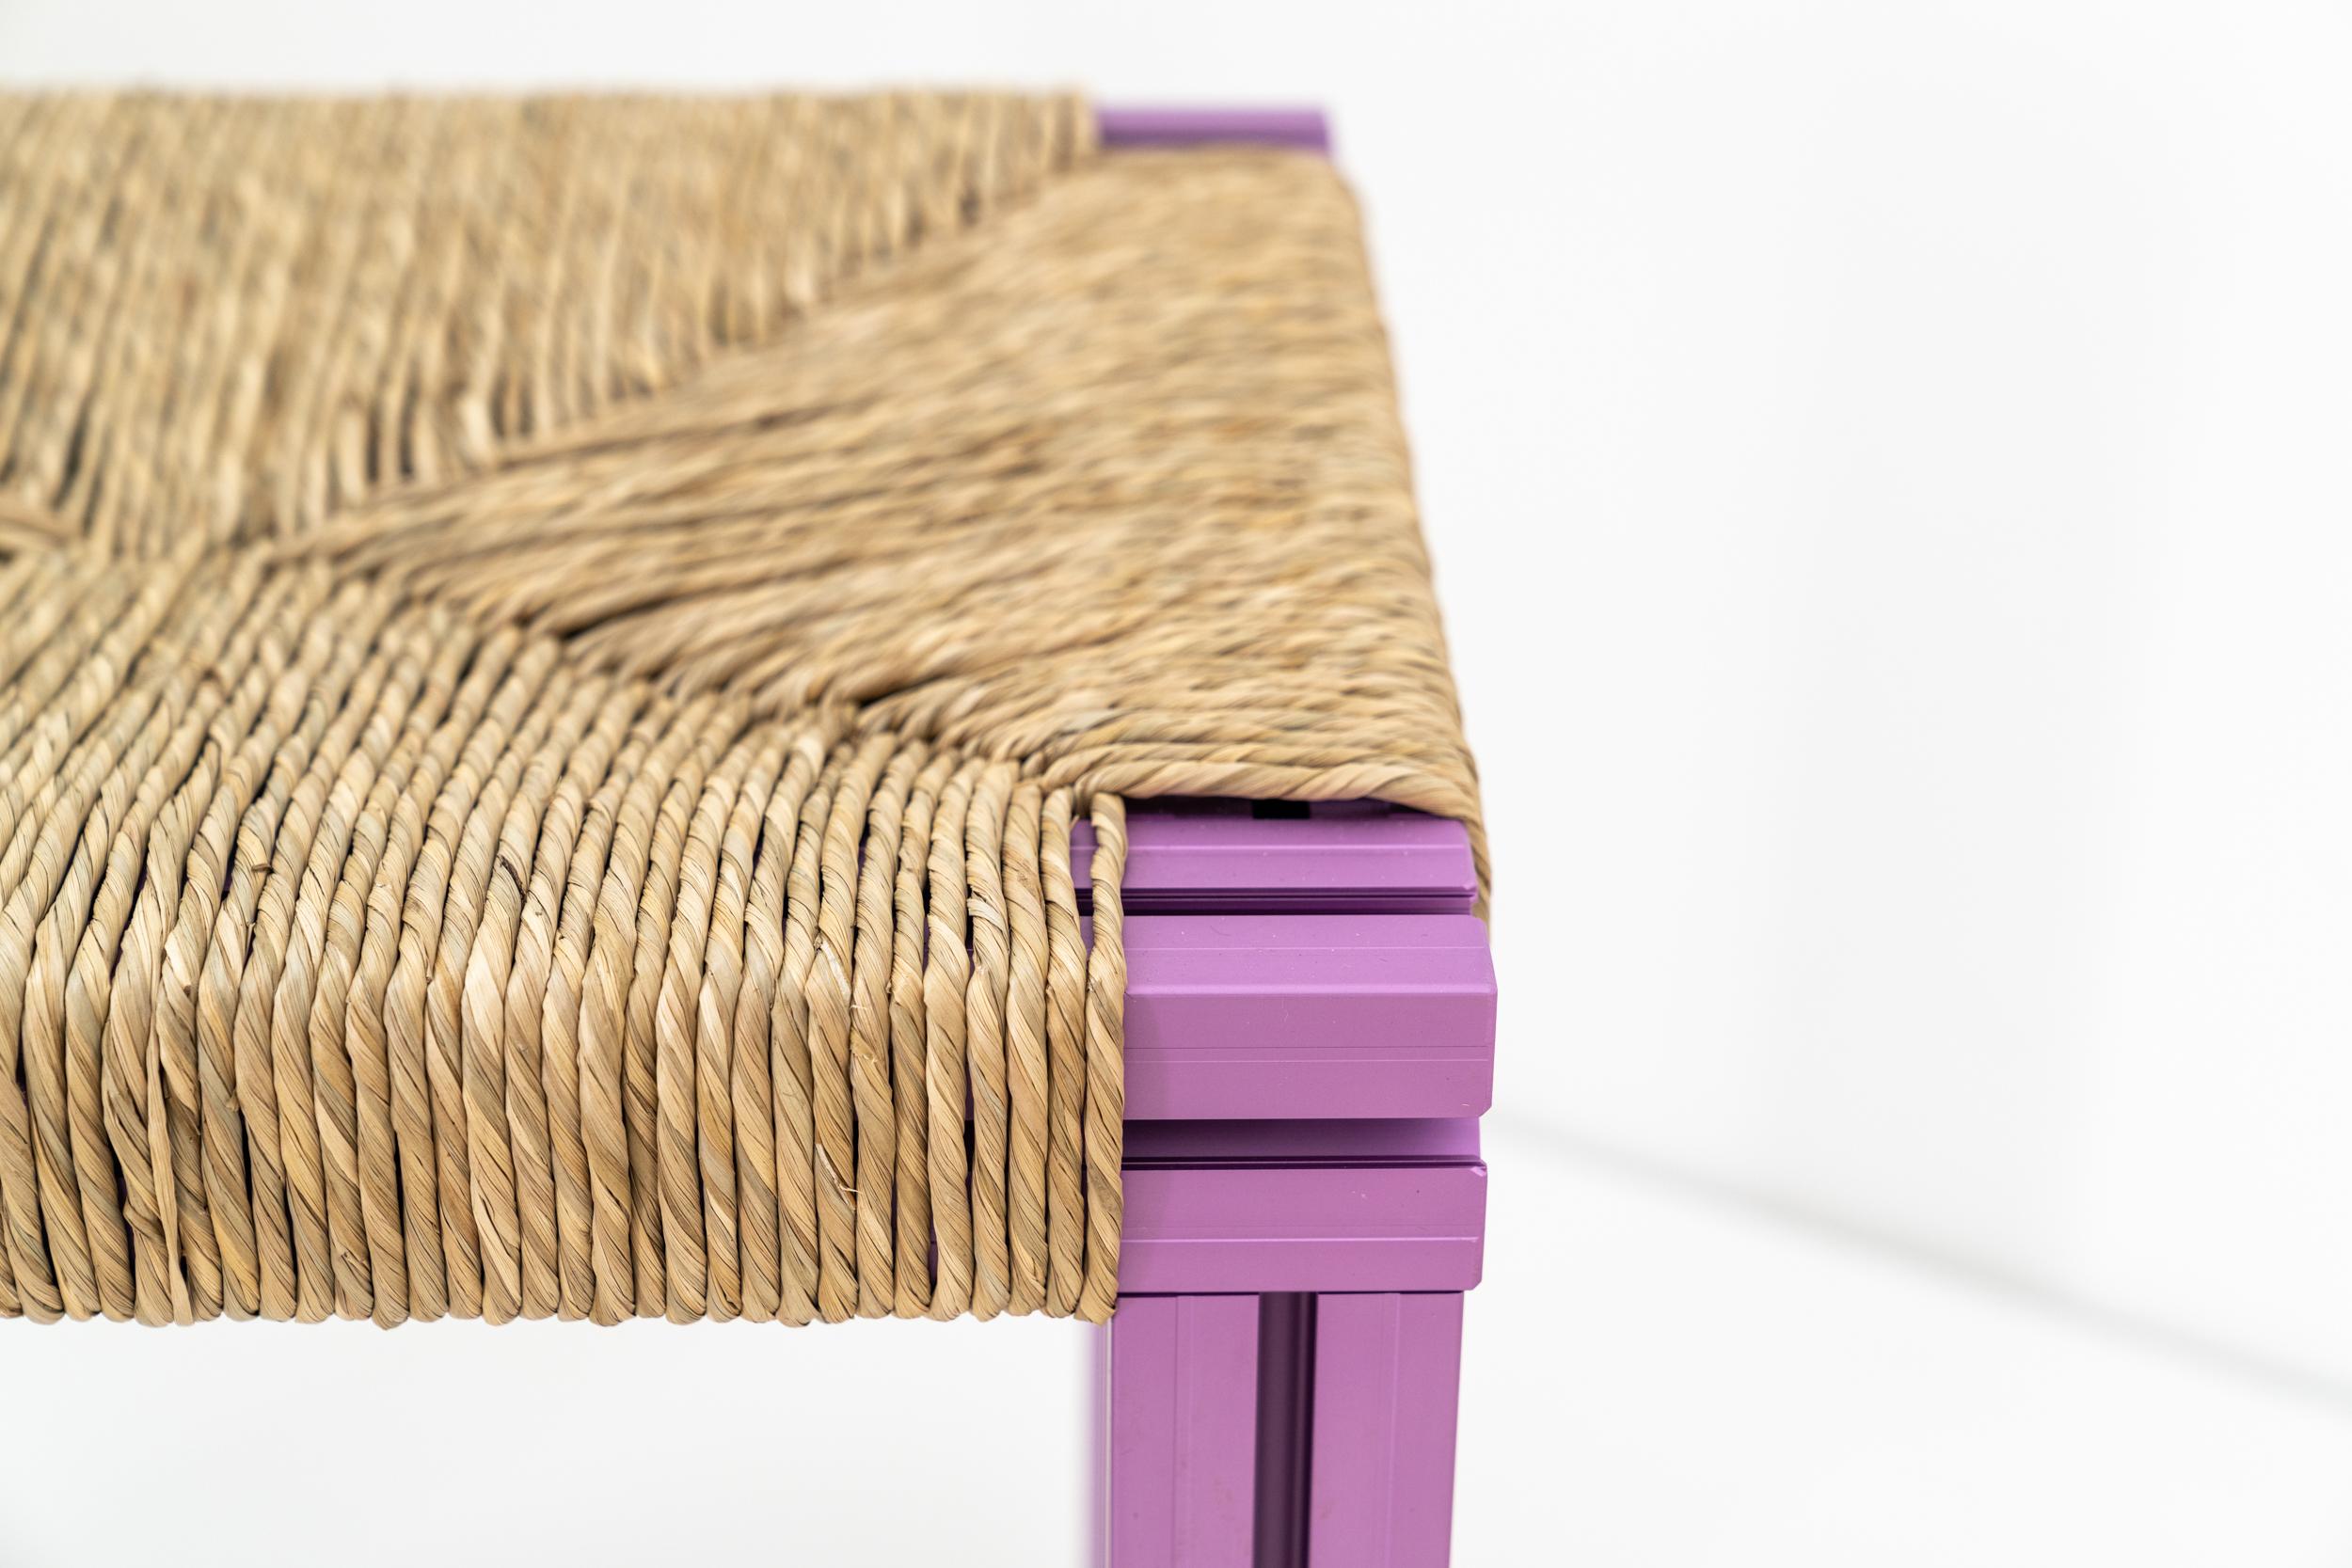 Aluminum Anodized Purple and Rush Weave Wicker Stool by Tino Seubert For Sale